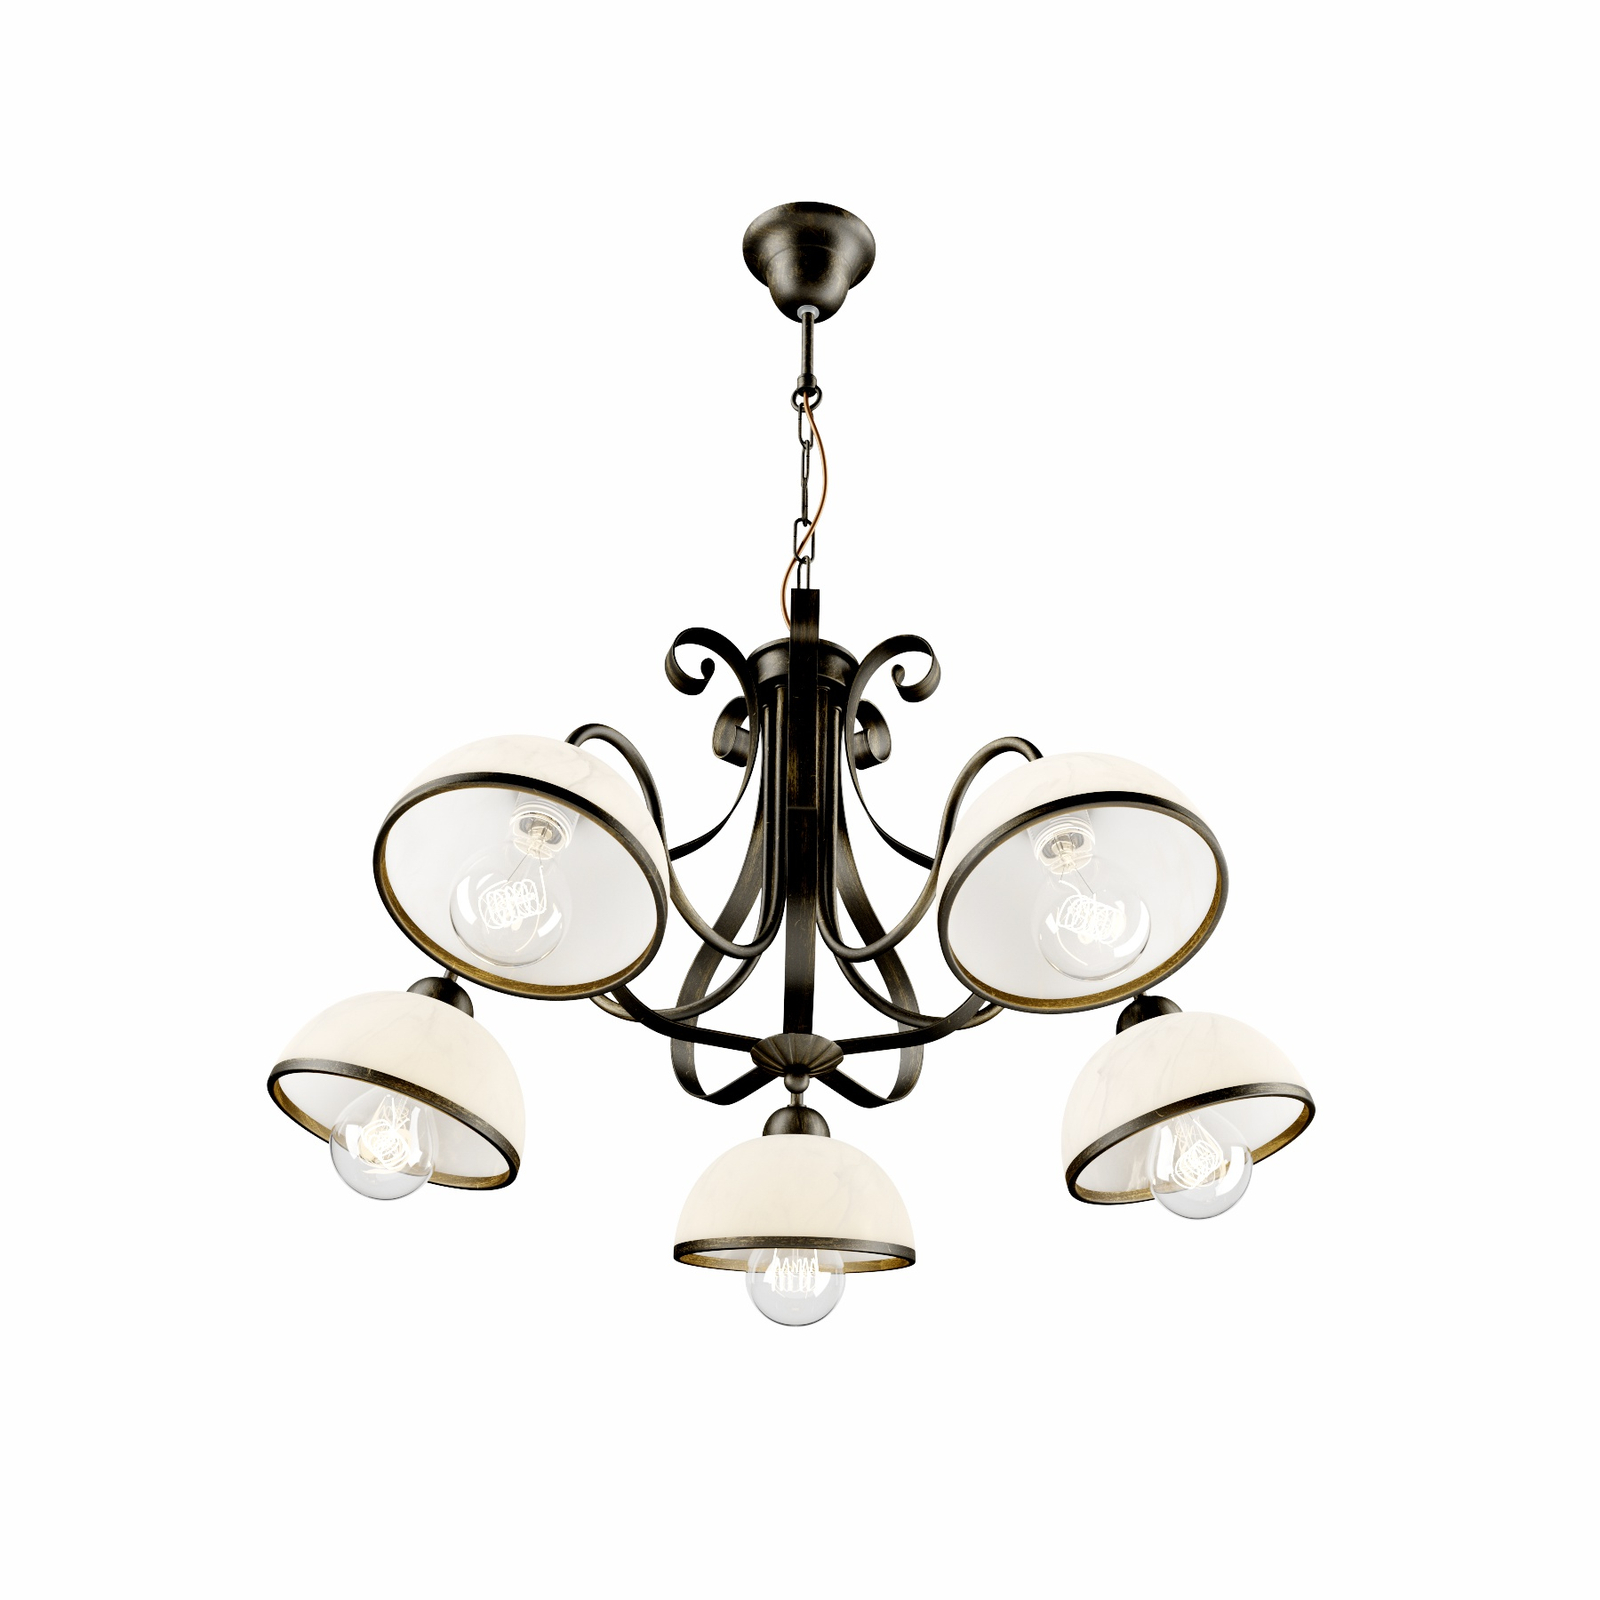 Antica pendant light in country house style, 5-bulb